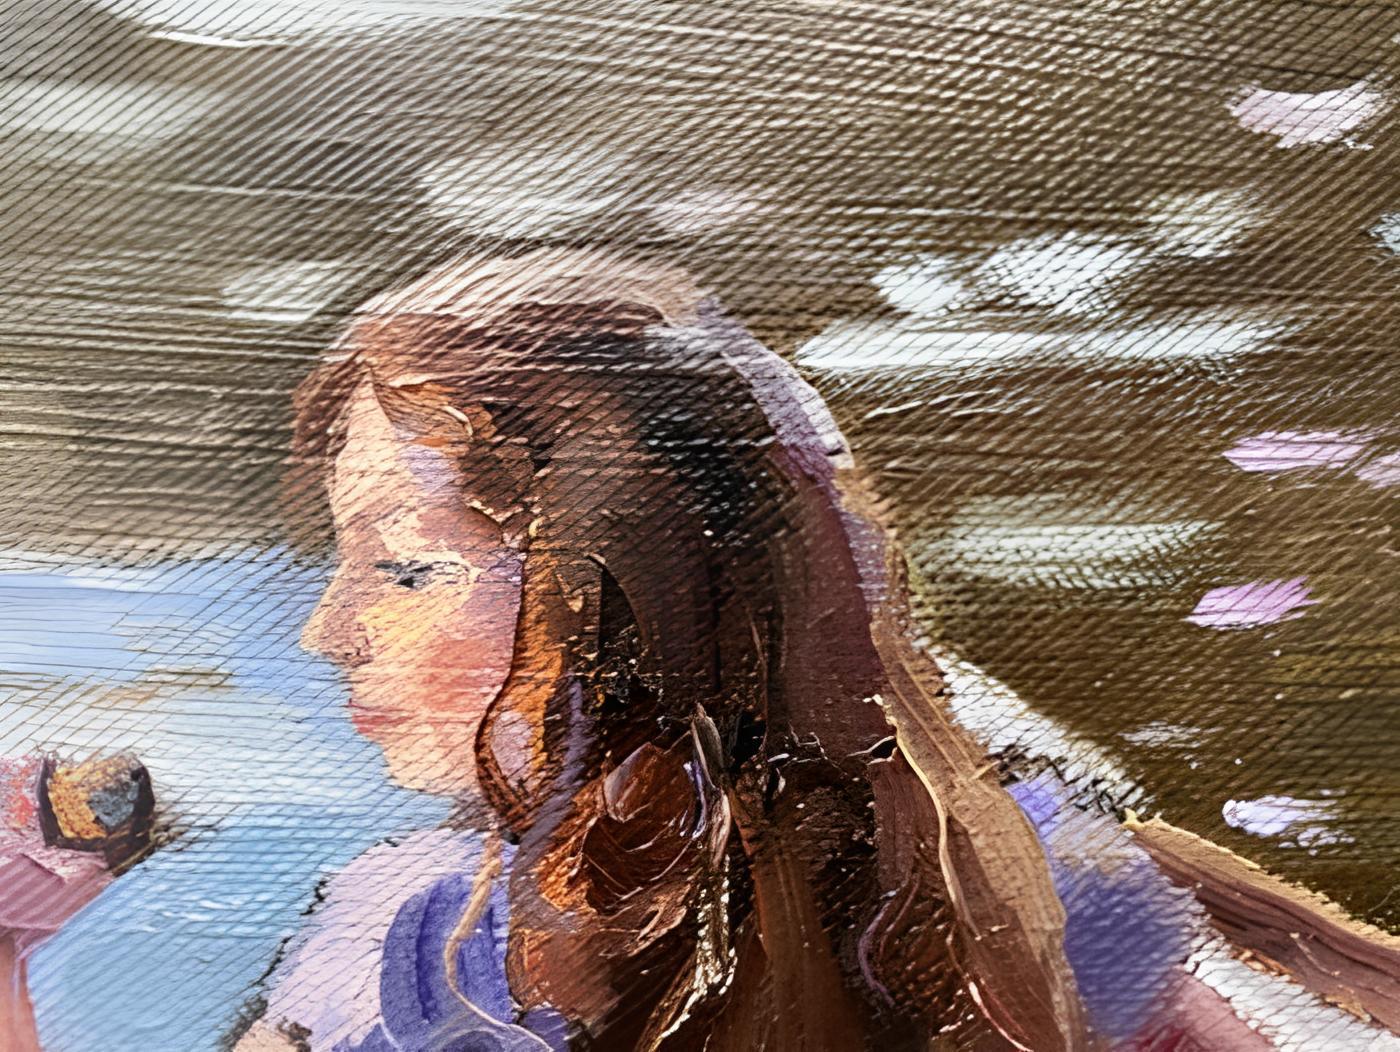 In this oil painting, I captured a serene moment of a young girl adrift in her thoughts, gracefully guiding her boat across the gentle waters. The interplay of light on the ripples creates a dance of warmth and tranquility. Each brushstroke conveys